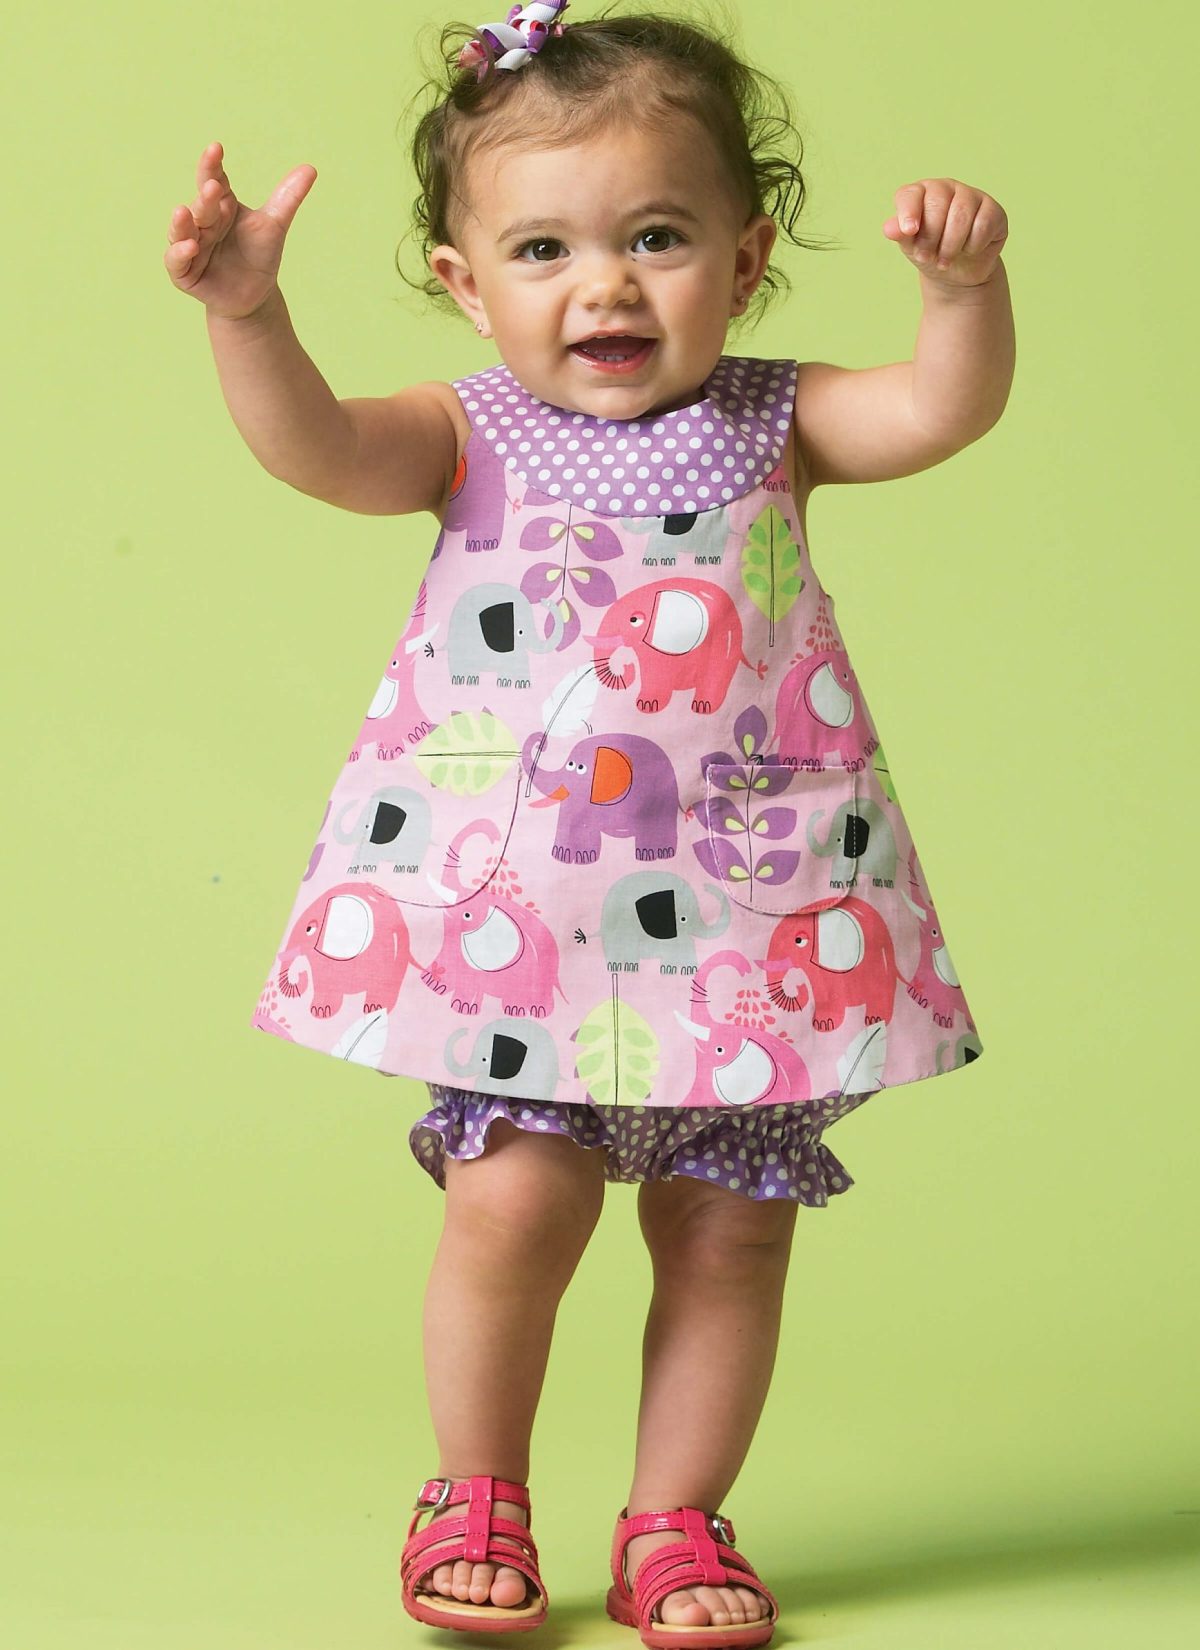 McCall's Sewing Pattern M6912 Infants' Reversible Top, Dresses; Bloomers and Pants